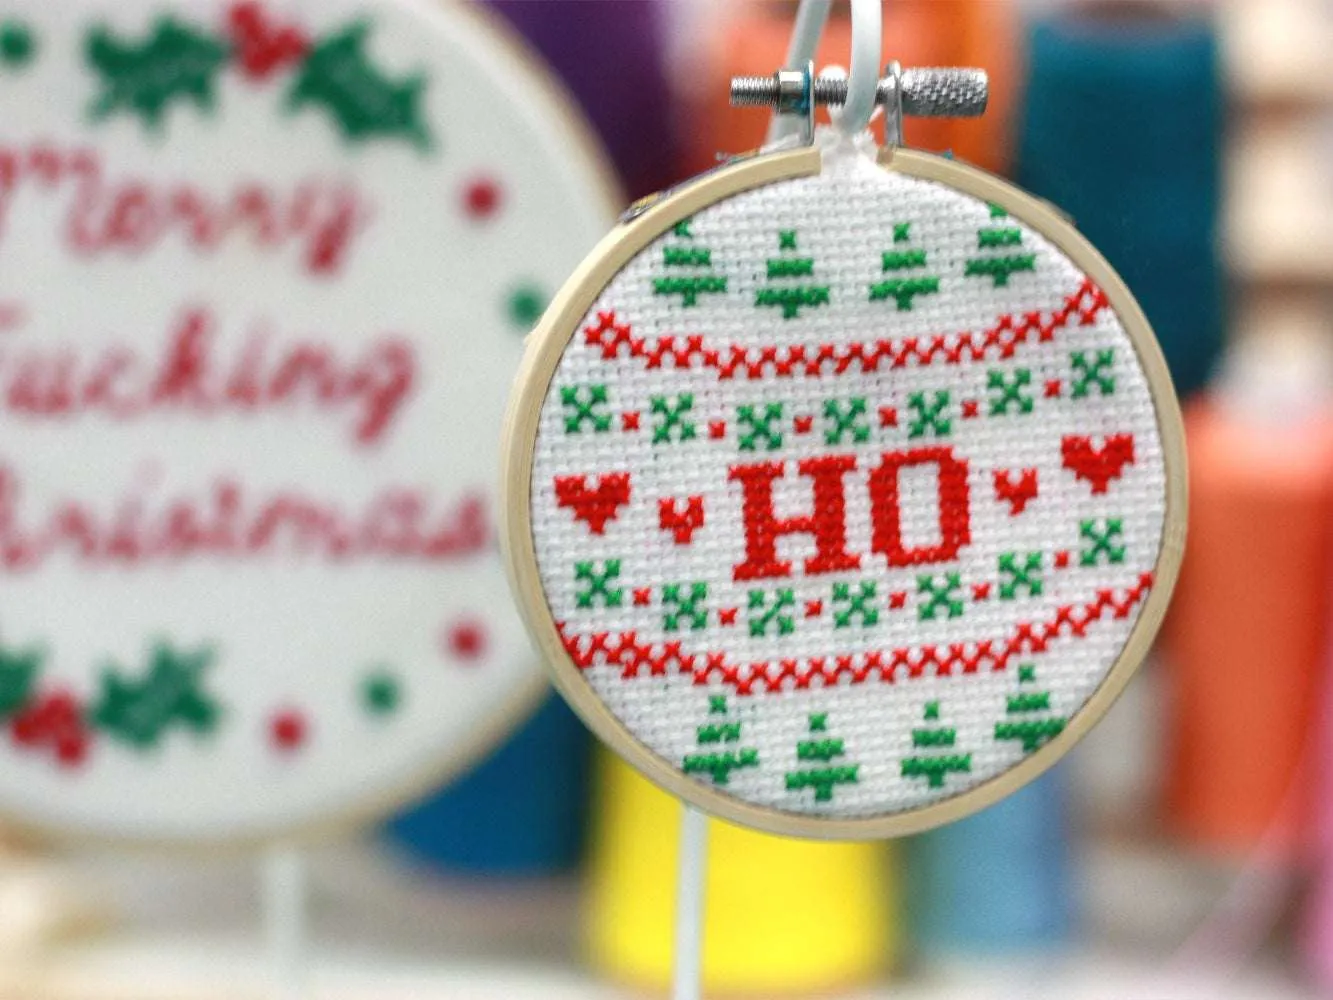 A cross stitch reading 'HO' in red text surrounded by red and green Christmas patterns, hangs in front of other cross stitch hoops